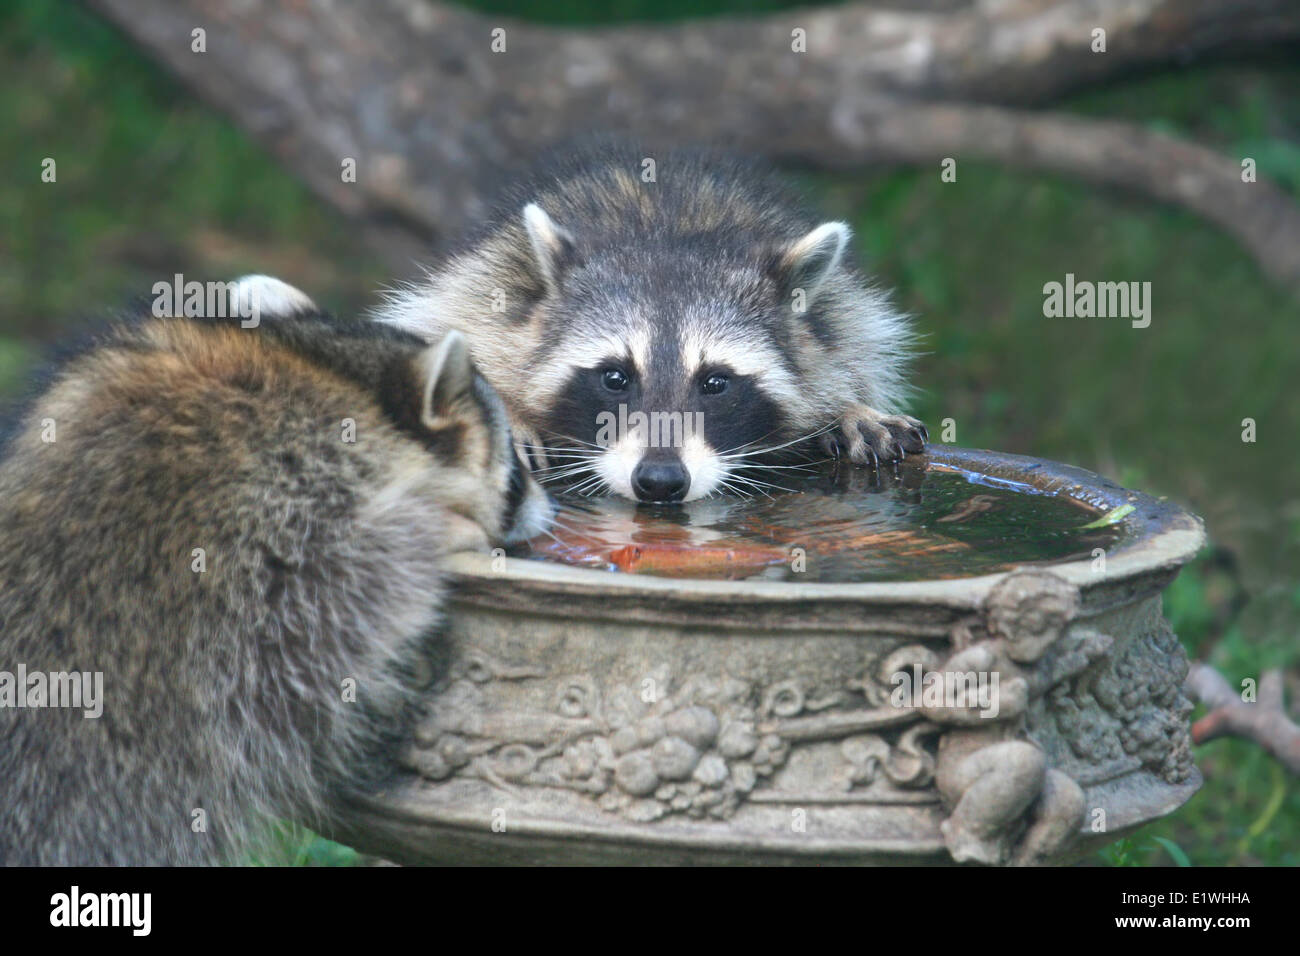 Common Raccoons drinking out of a bird bath Stock Photo